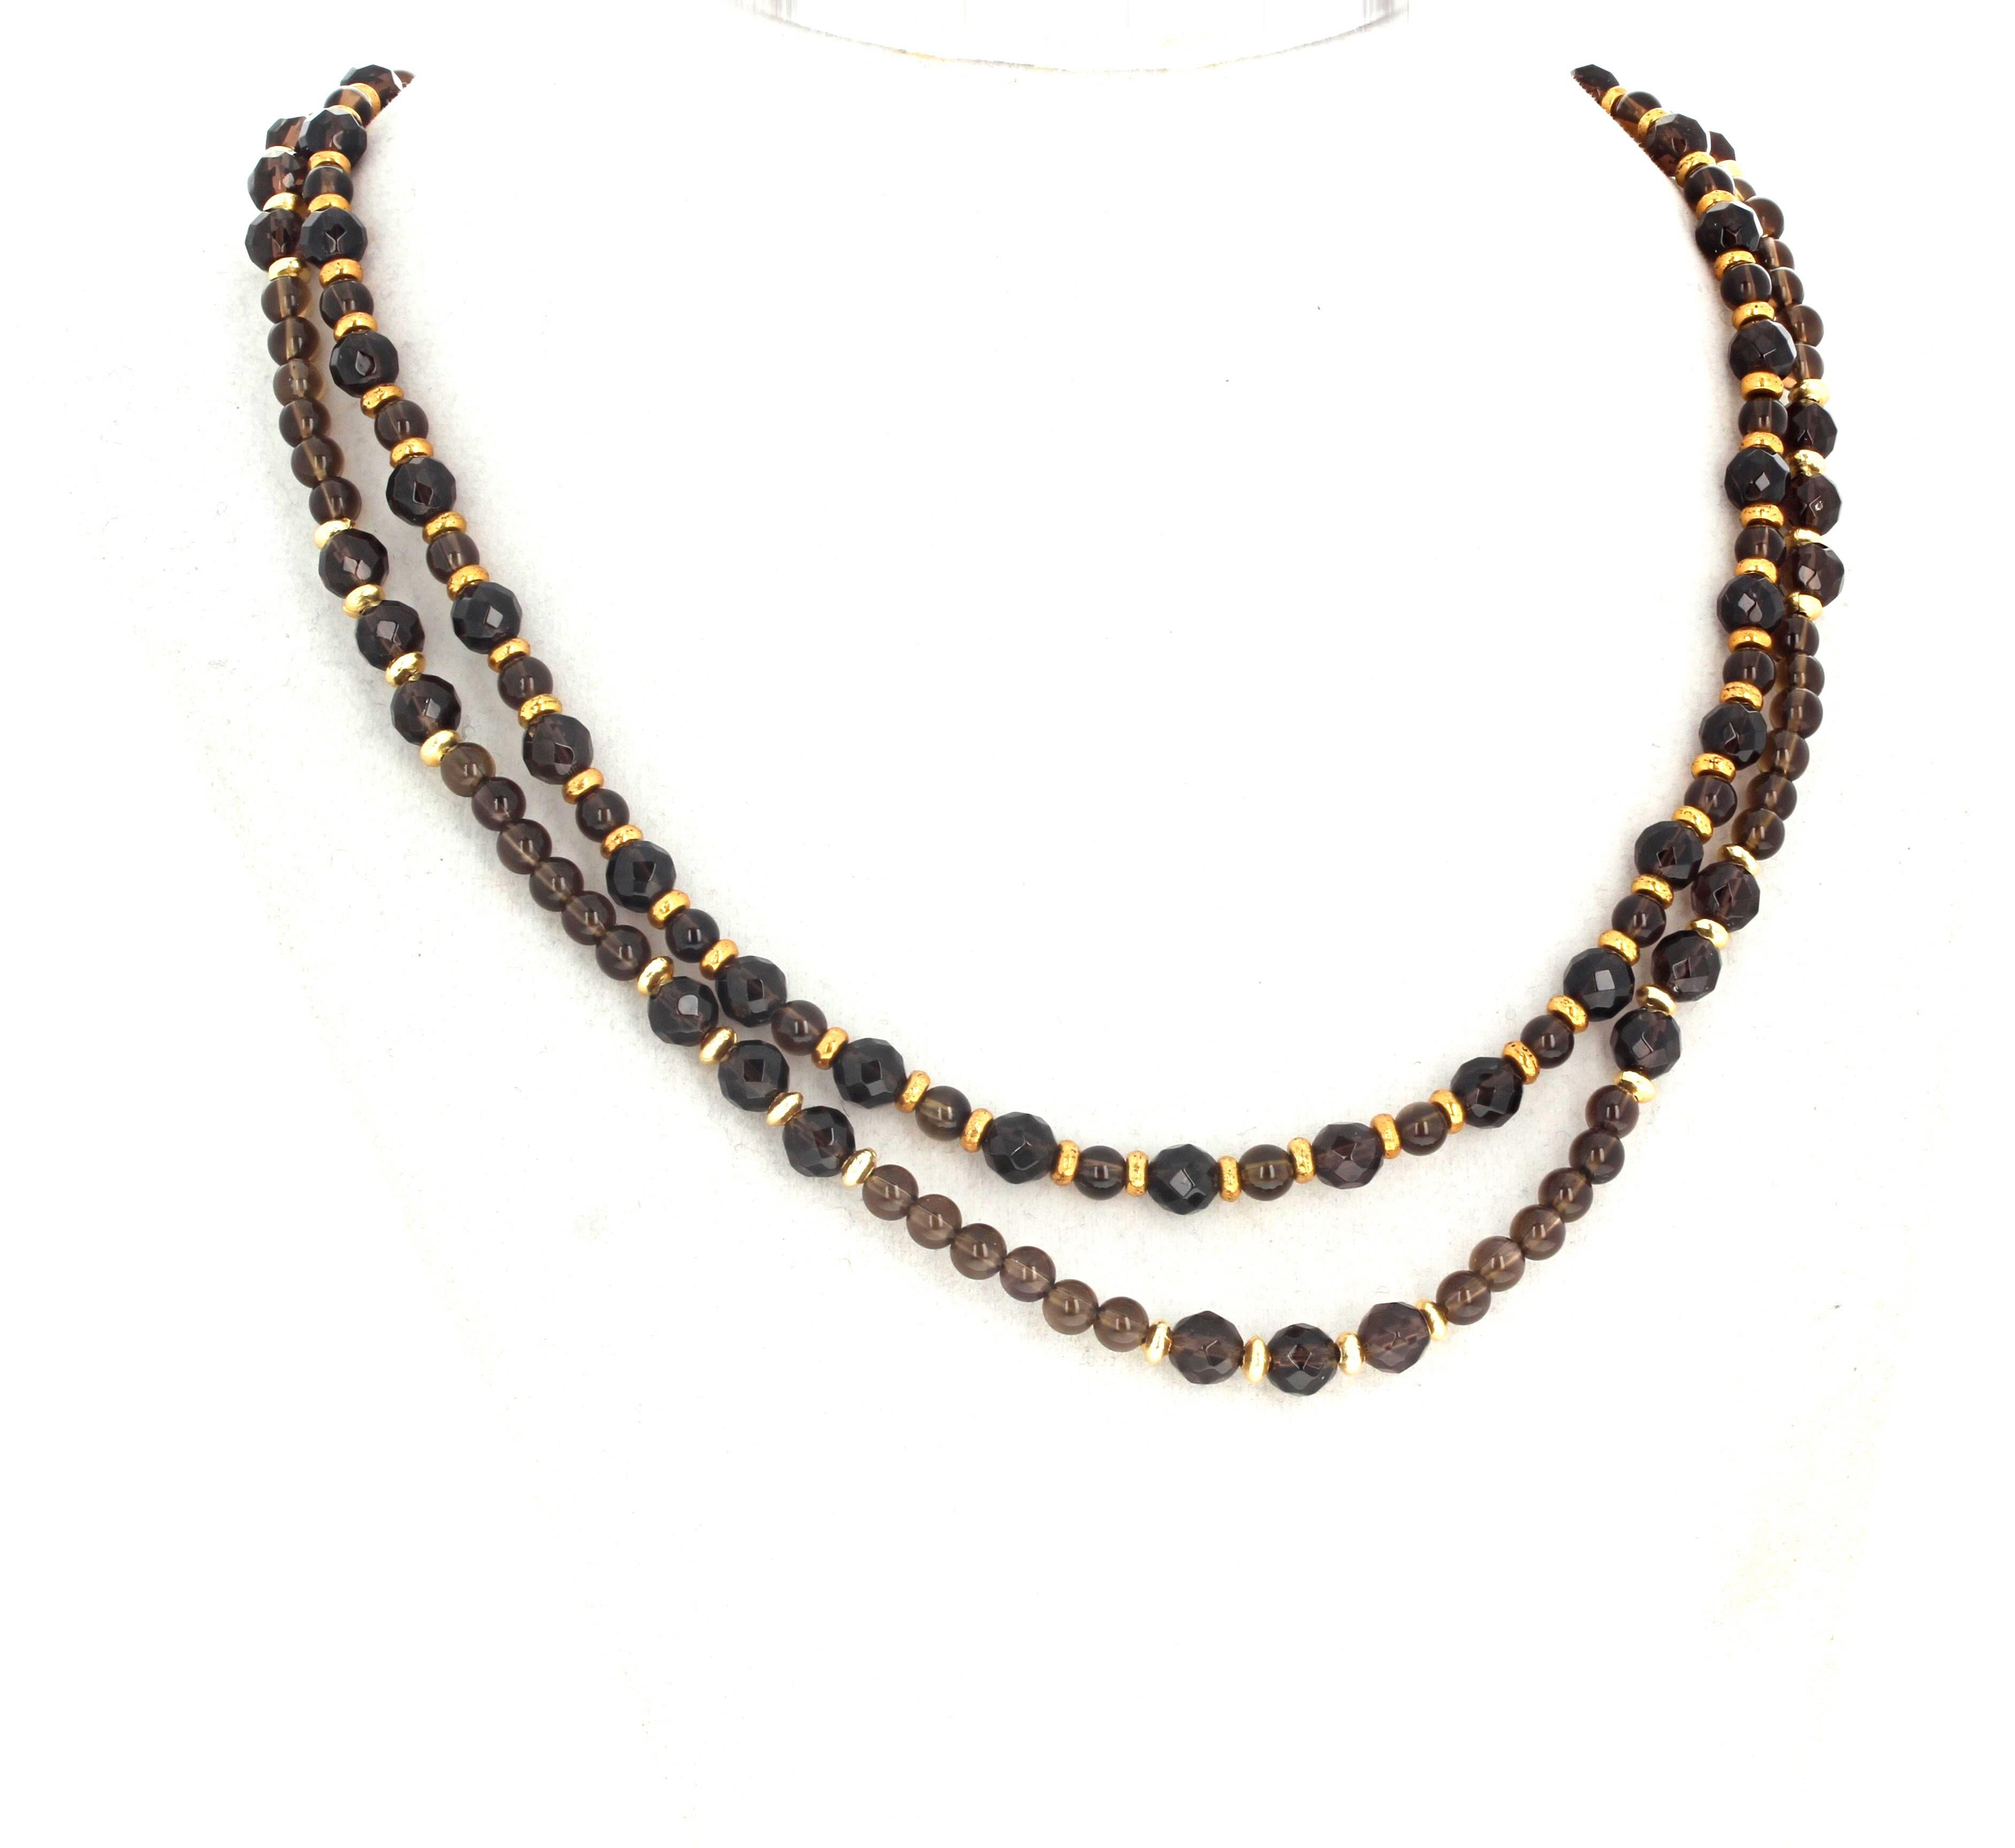 This simple double strand natural Smoky Quartz necklace is 17 inches long.  The larger gem cut highly polished Smoky Quartz are approximately 6mm and they are enhanced with tiny gold plated rondels in this elegant necklace.  The clasp is an easy to